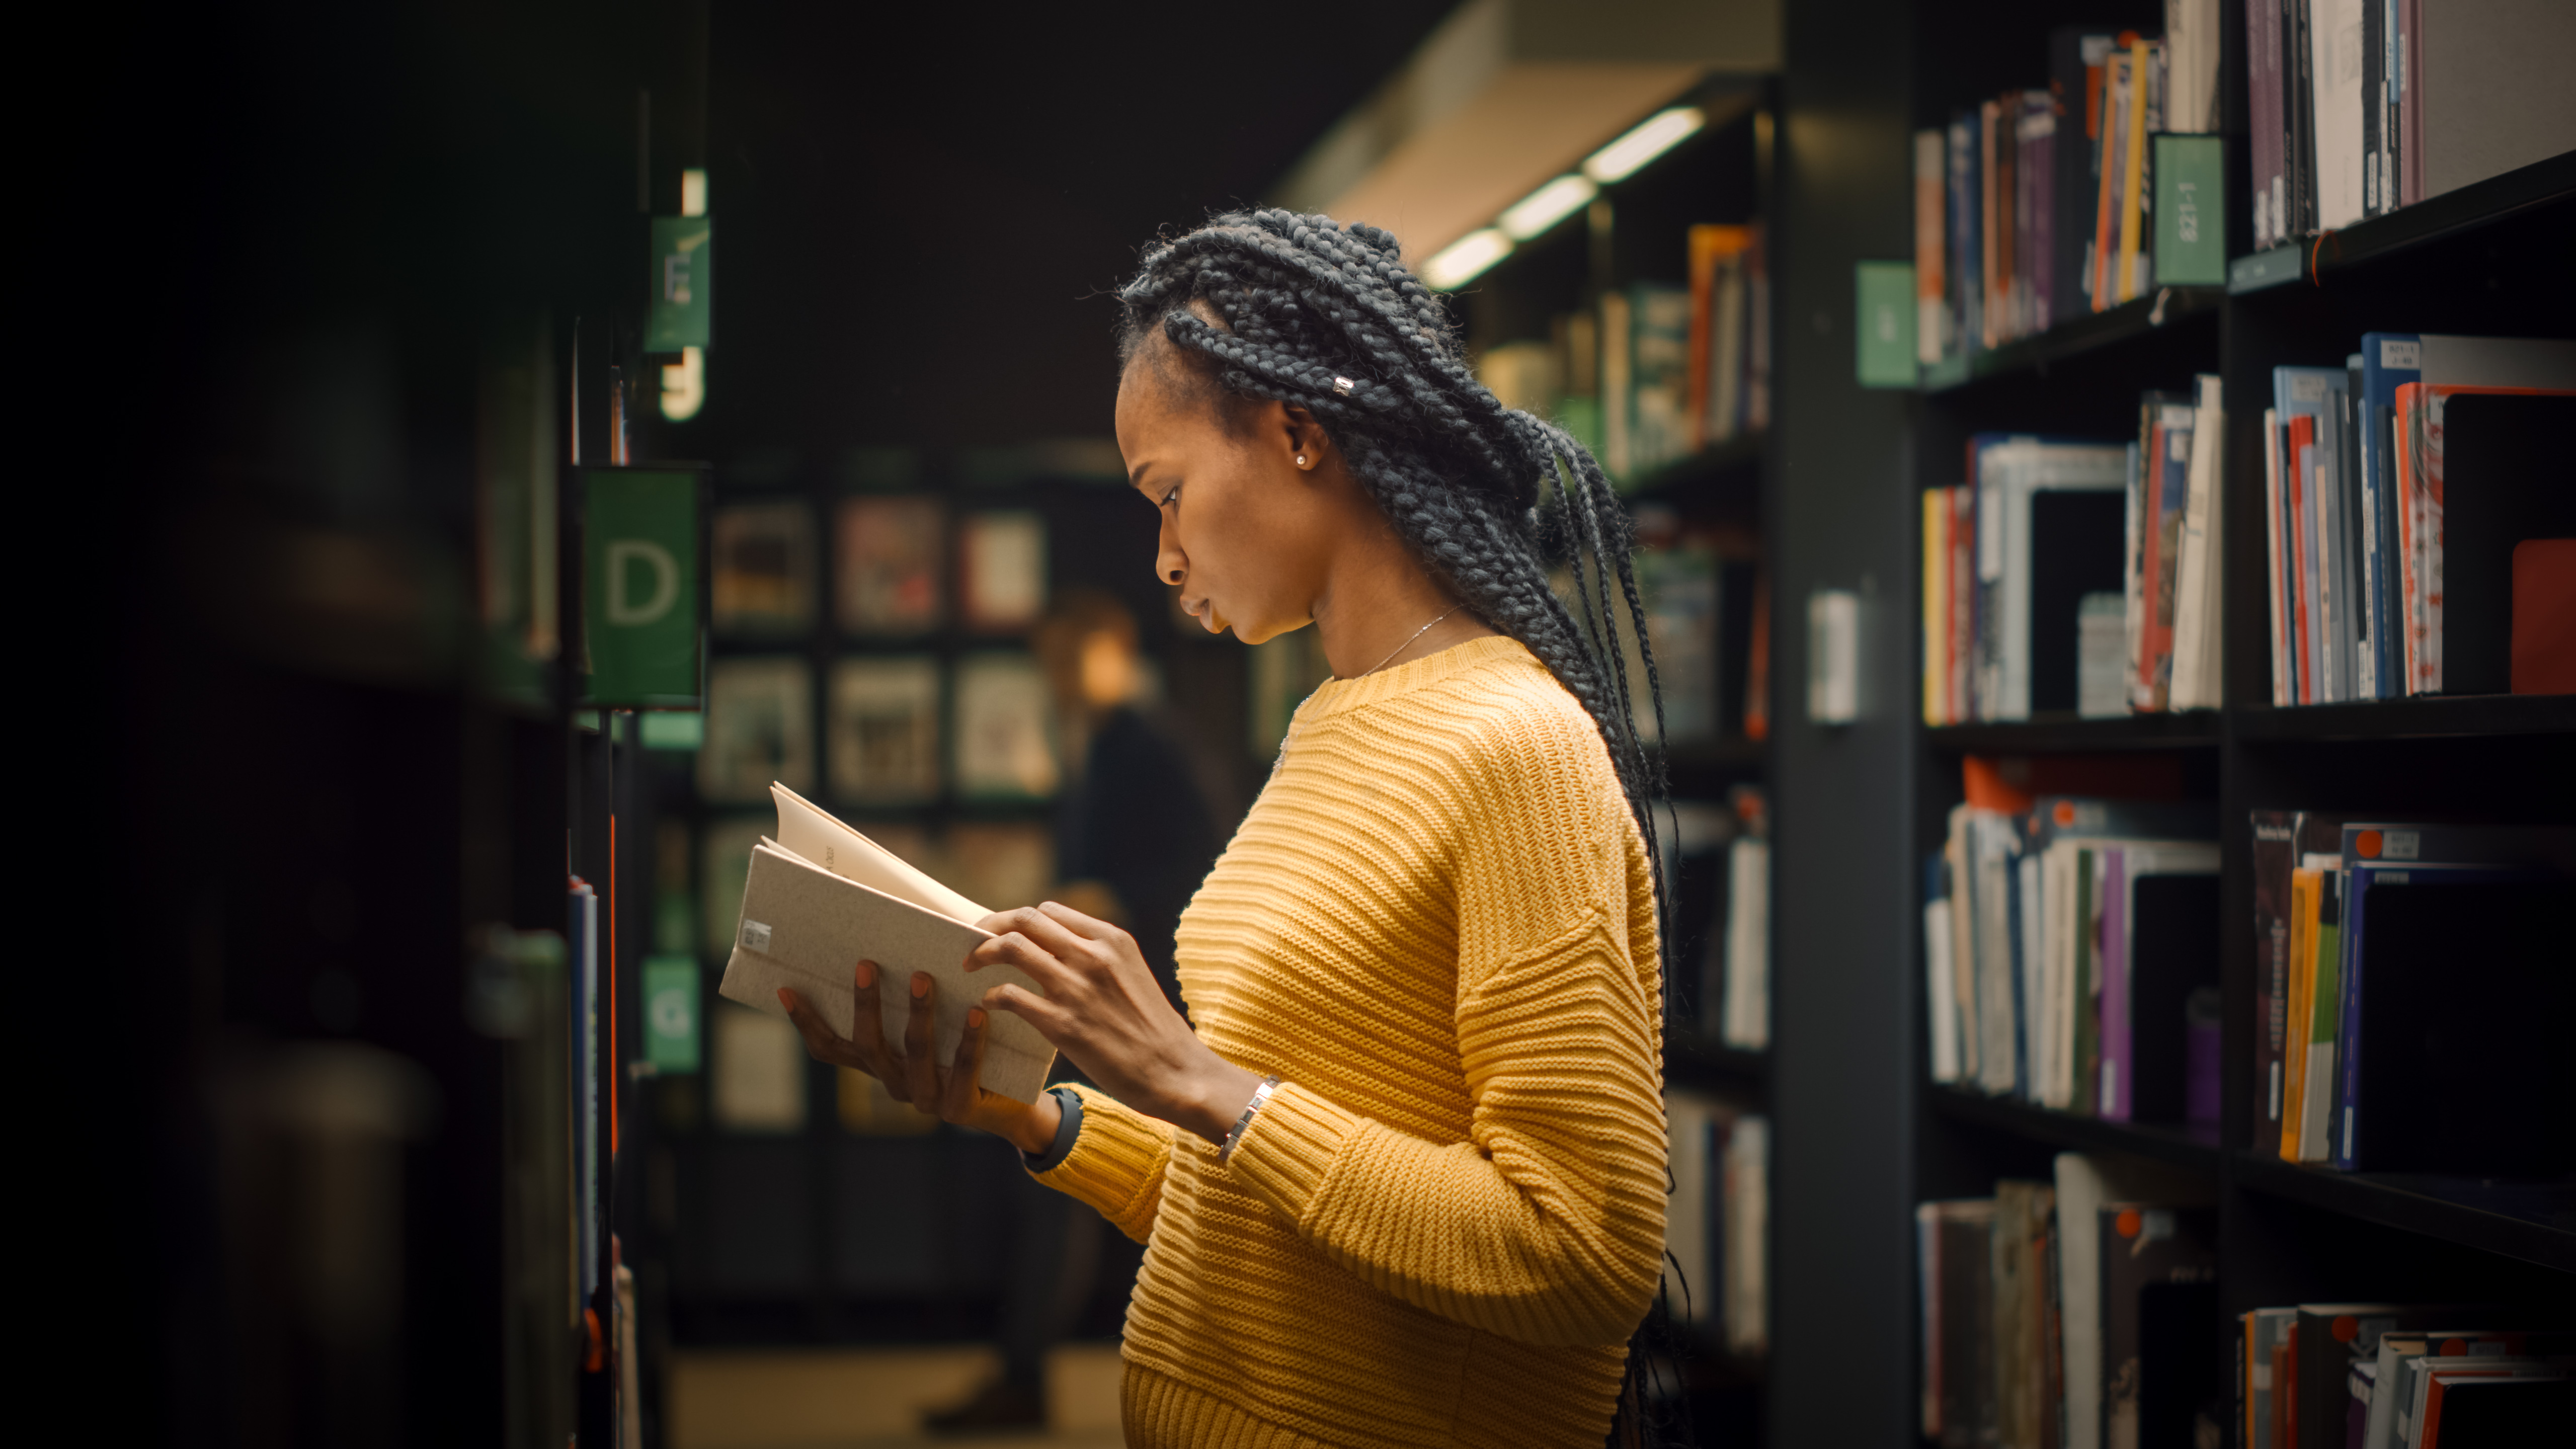 University Library: Portrait of Gifted Beautiful Black Girl Stands Between Rows of Bookshelves and Searching for the Right Book Title, Finds and Picks one for Class Assignment